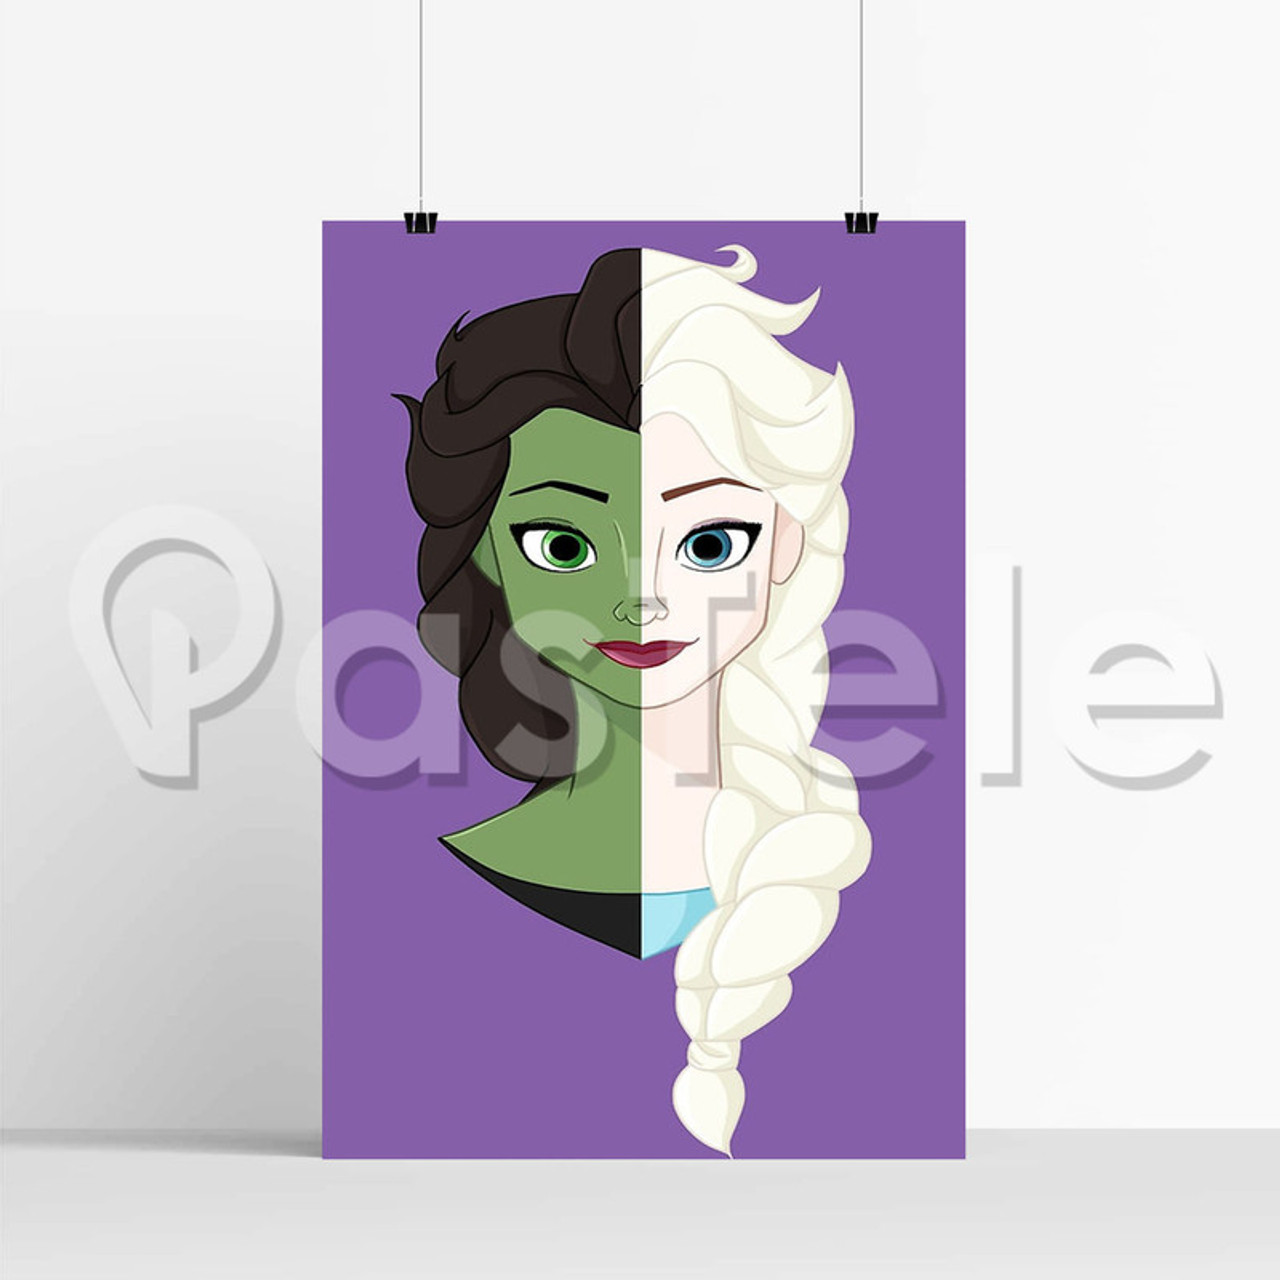 https://cdn11.bigcommerce.com/s-xhmrmcecz5/images/stencil/1280x1280/products/3497/4228/Disney-Frozen-Elsa-and-Elphaba-Wicked-Snow-Queen-Silk-Poster-Print-Wall-Decor-20-x-13-Inch-24-x-36-I__14408.1602302890.jpg?c=1